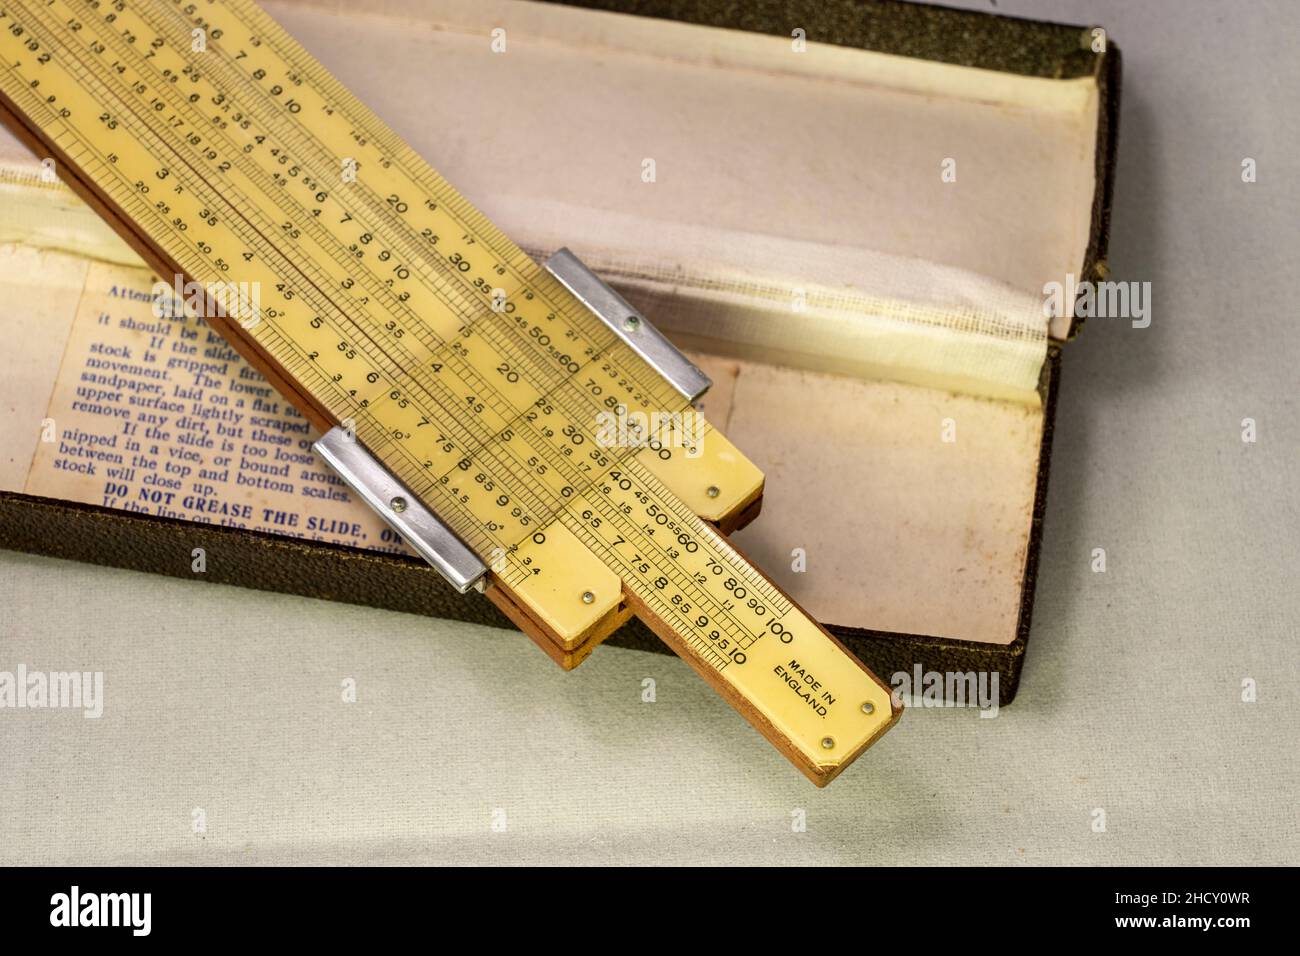 Old fashioned slide rule and box Stock Photo